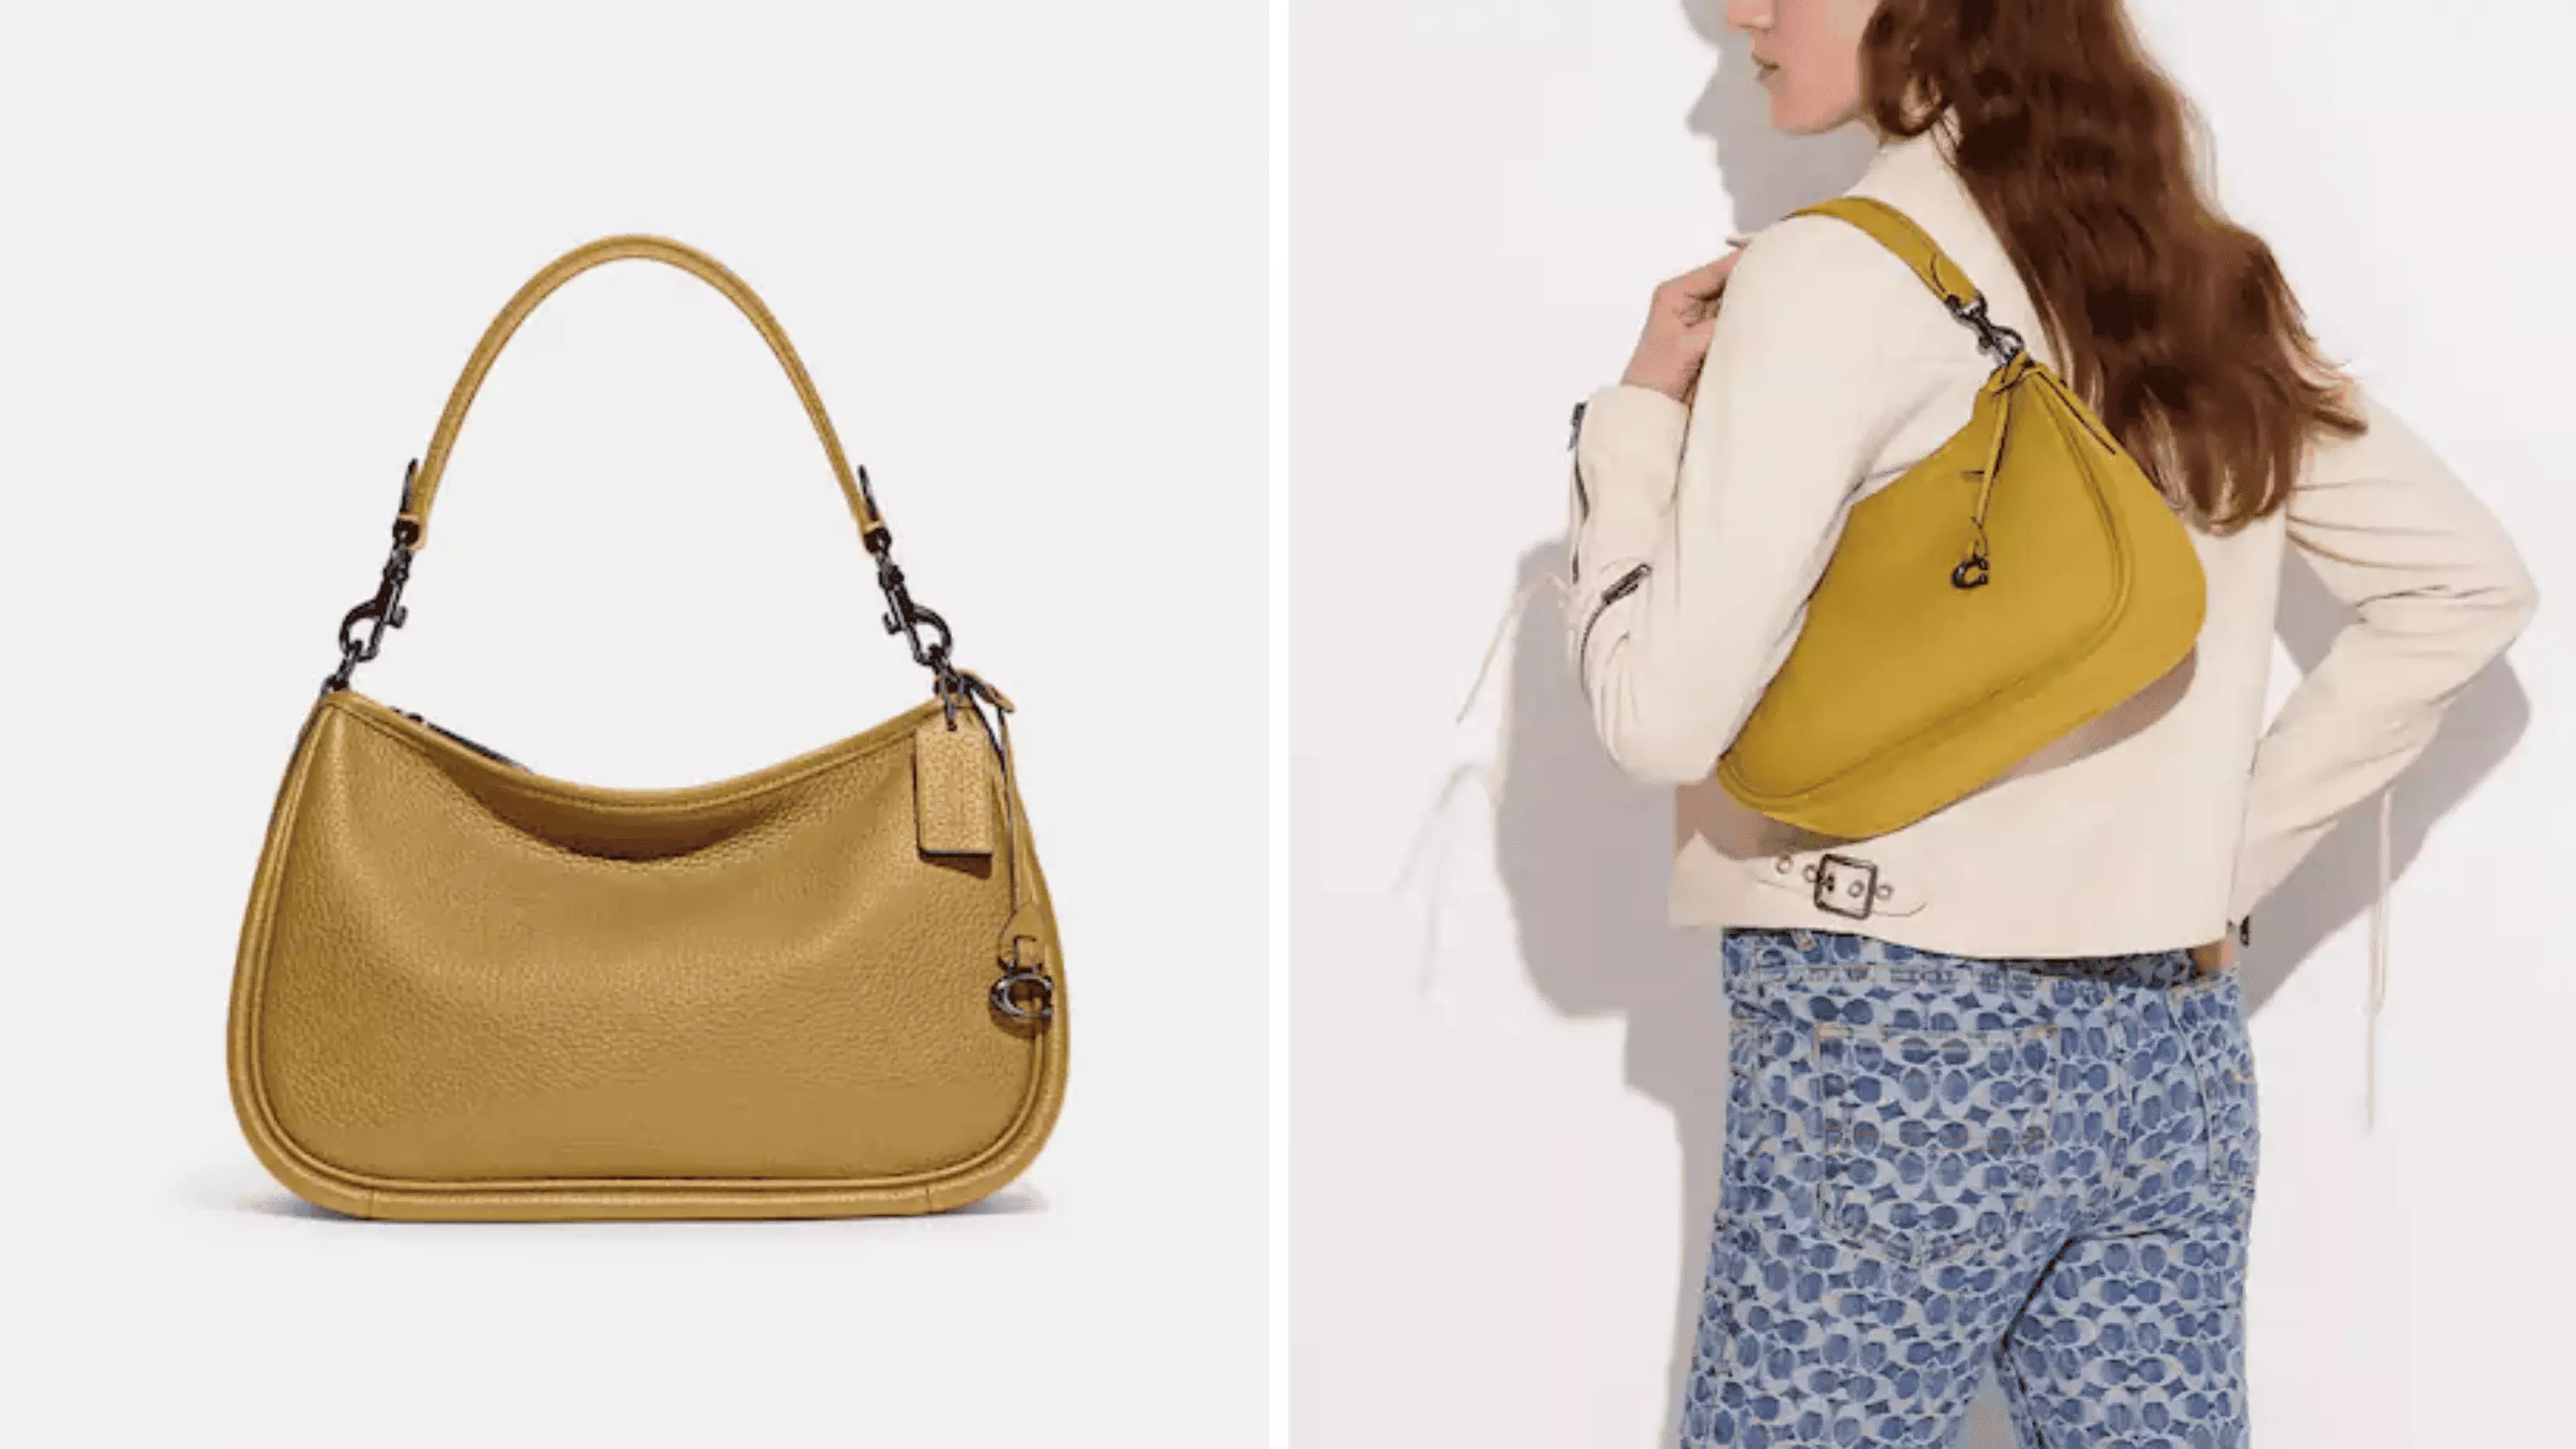 The Cary Crossbody delivers serious